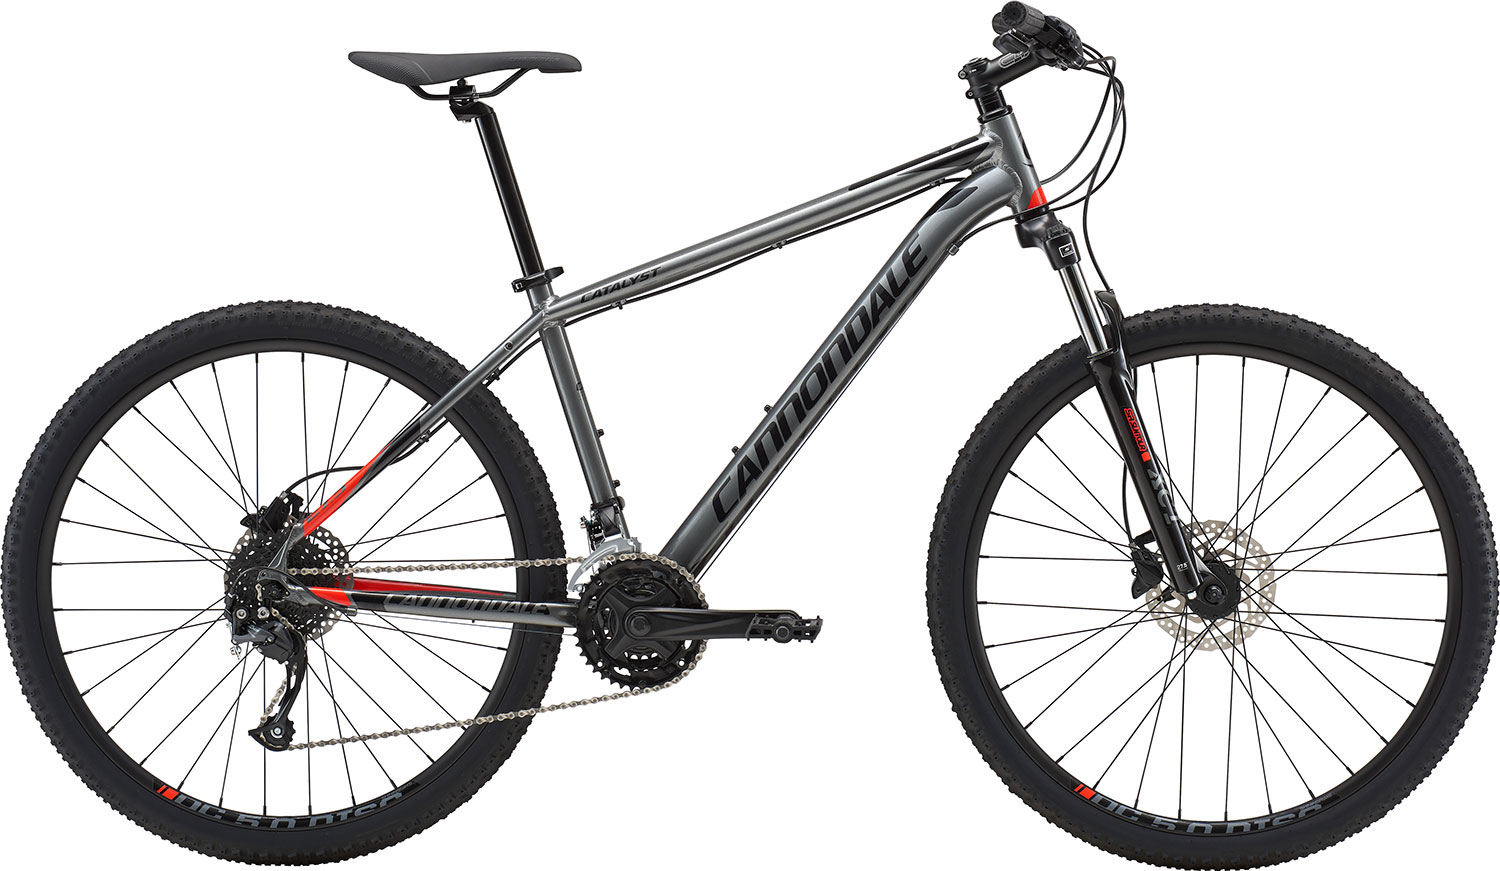 Велосипед 27,5" Cannondale CATALYST 2 рама - XL 2018 GRY серый фото 